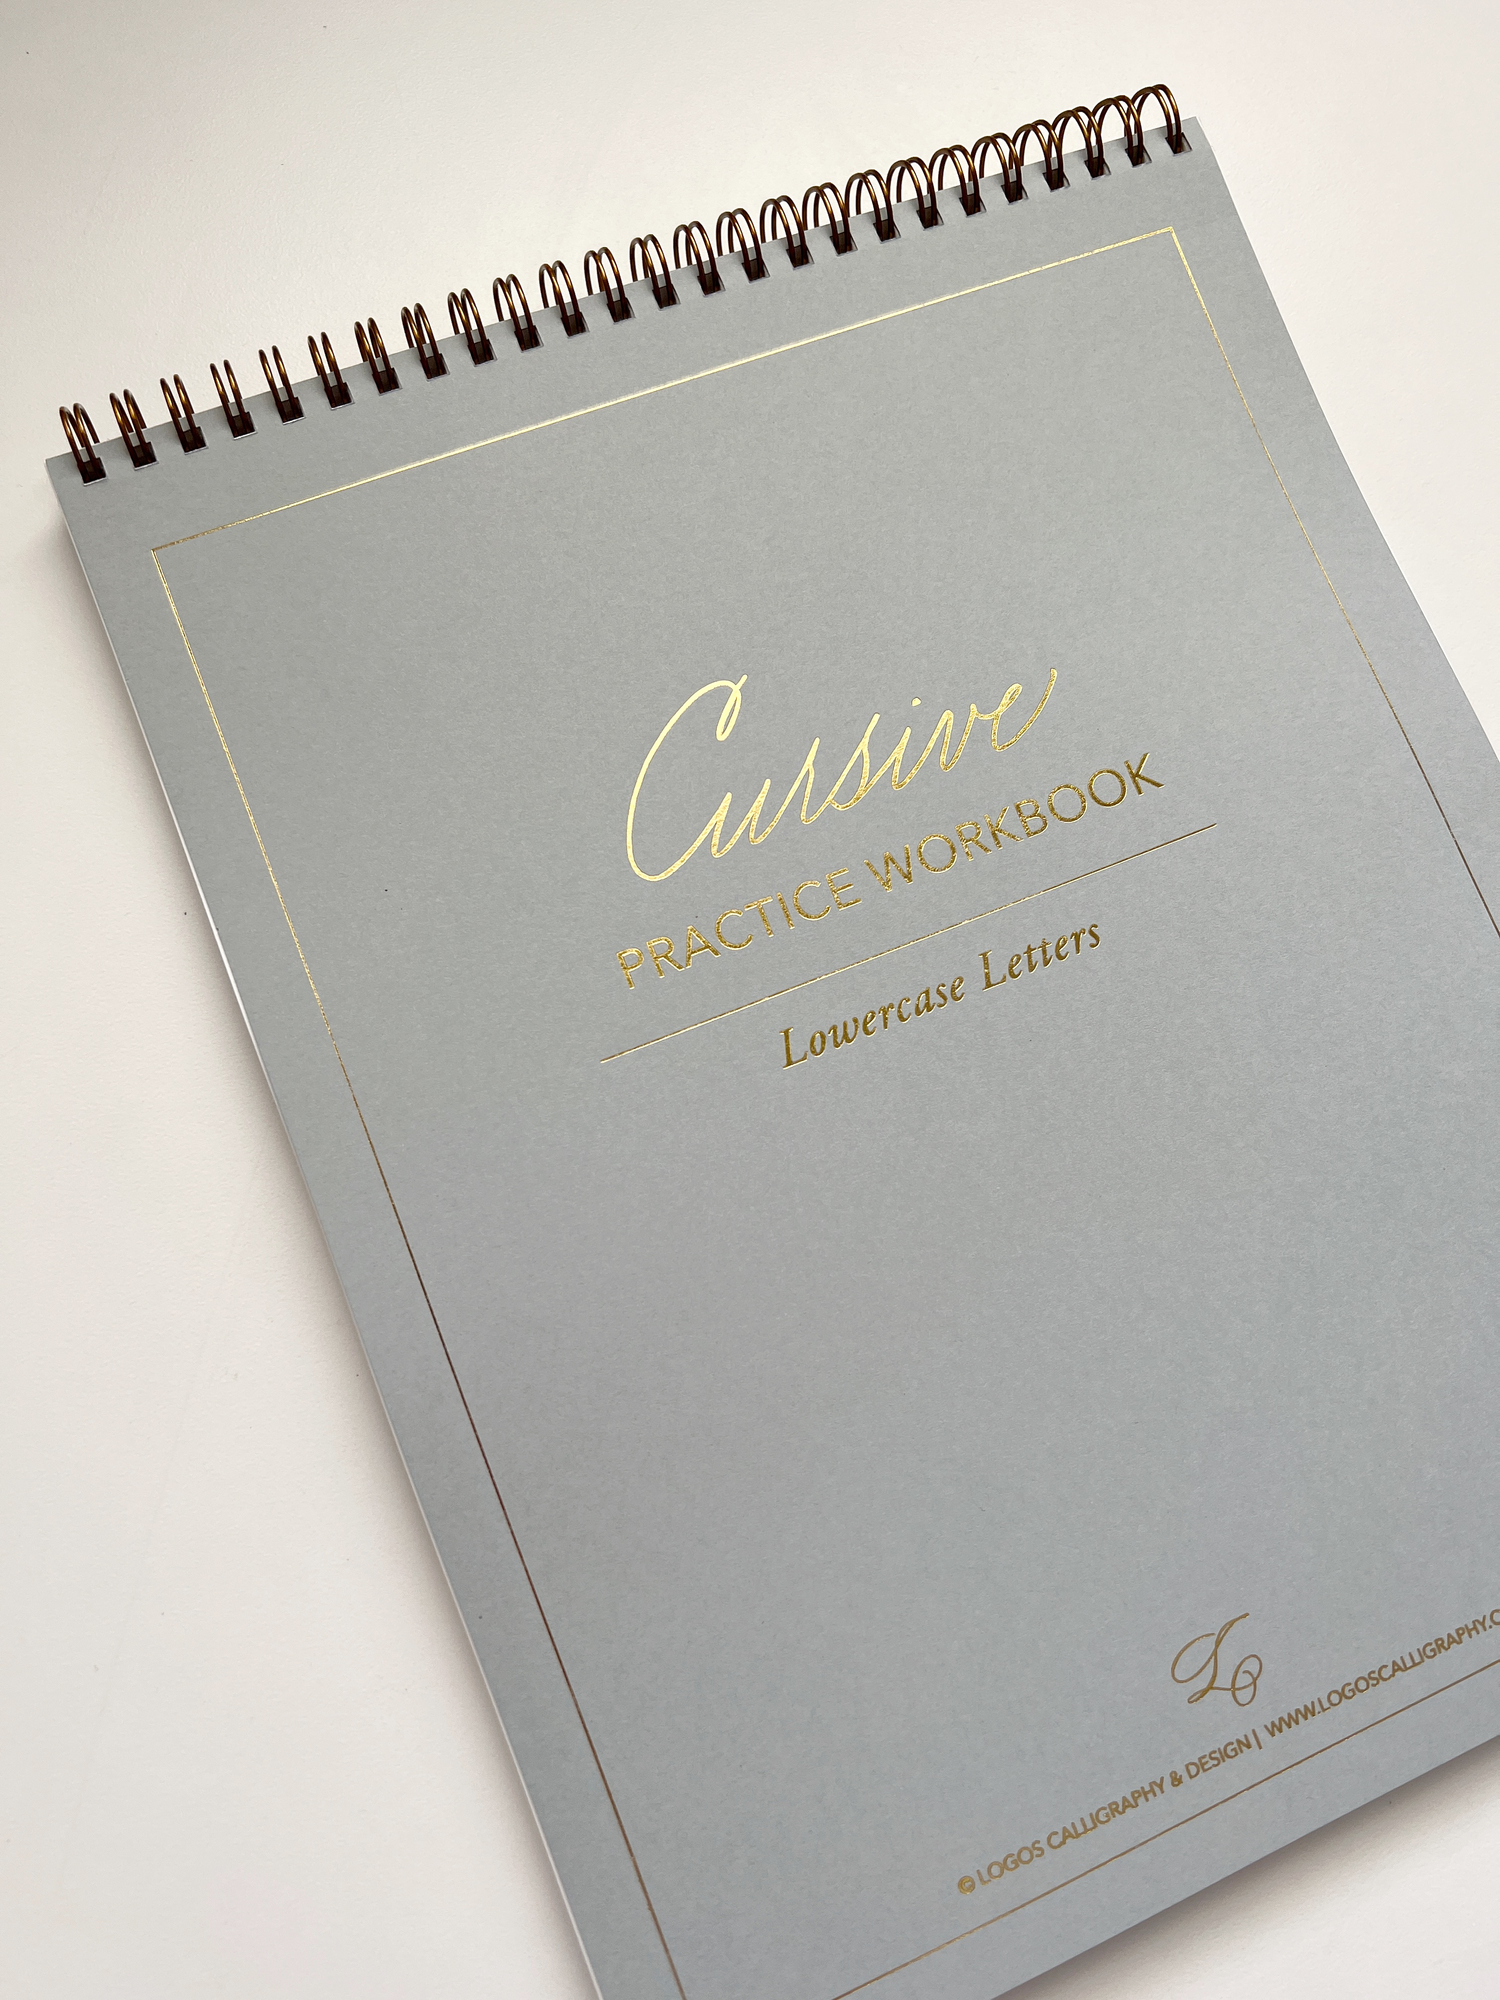 Kaye's Atelier 舒法 - Handwritten ledger and Louis Vuitton written in various  copperplate styles